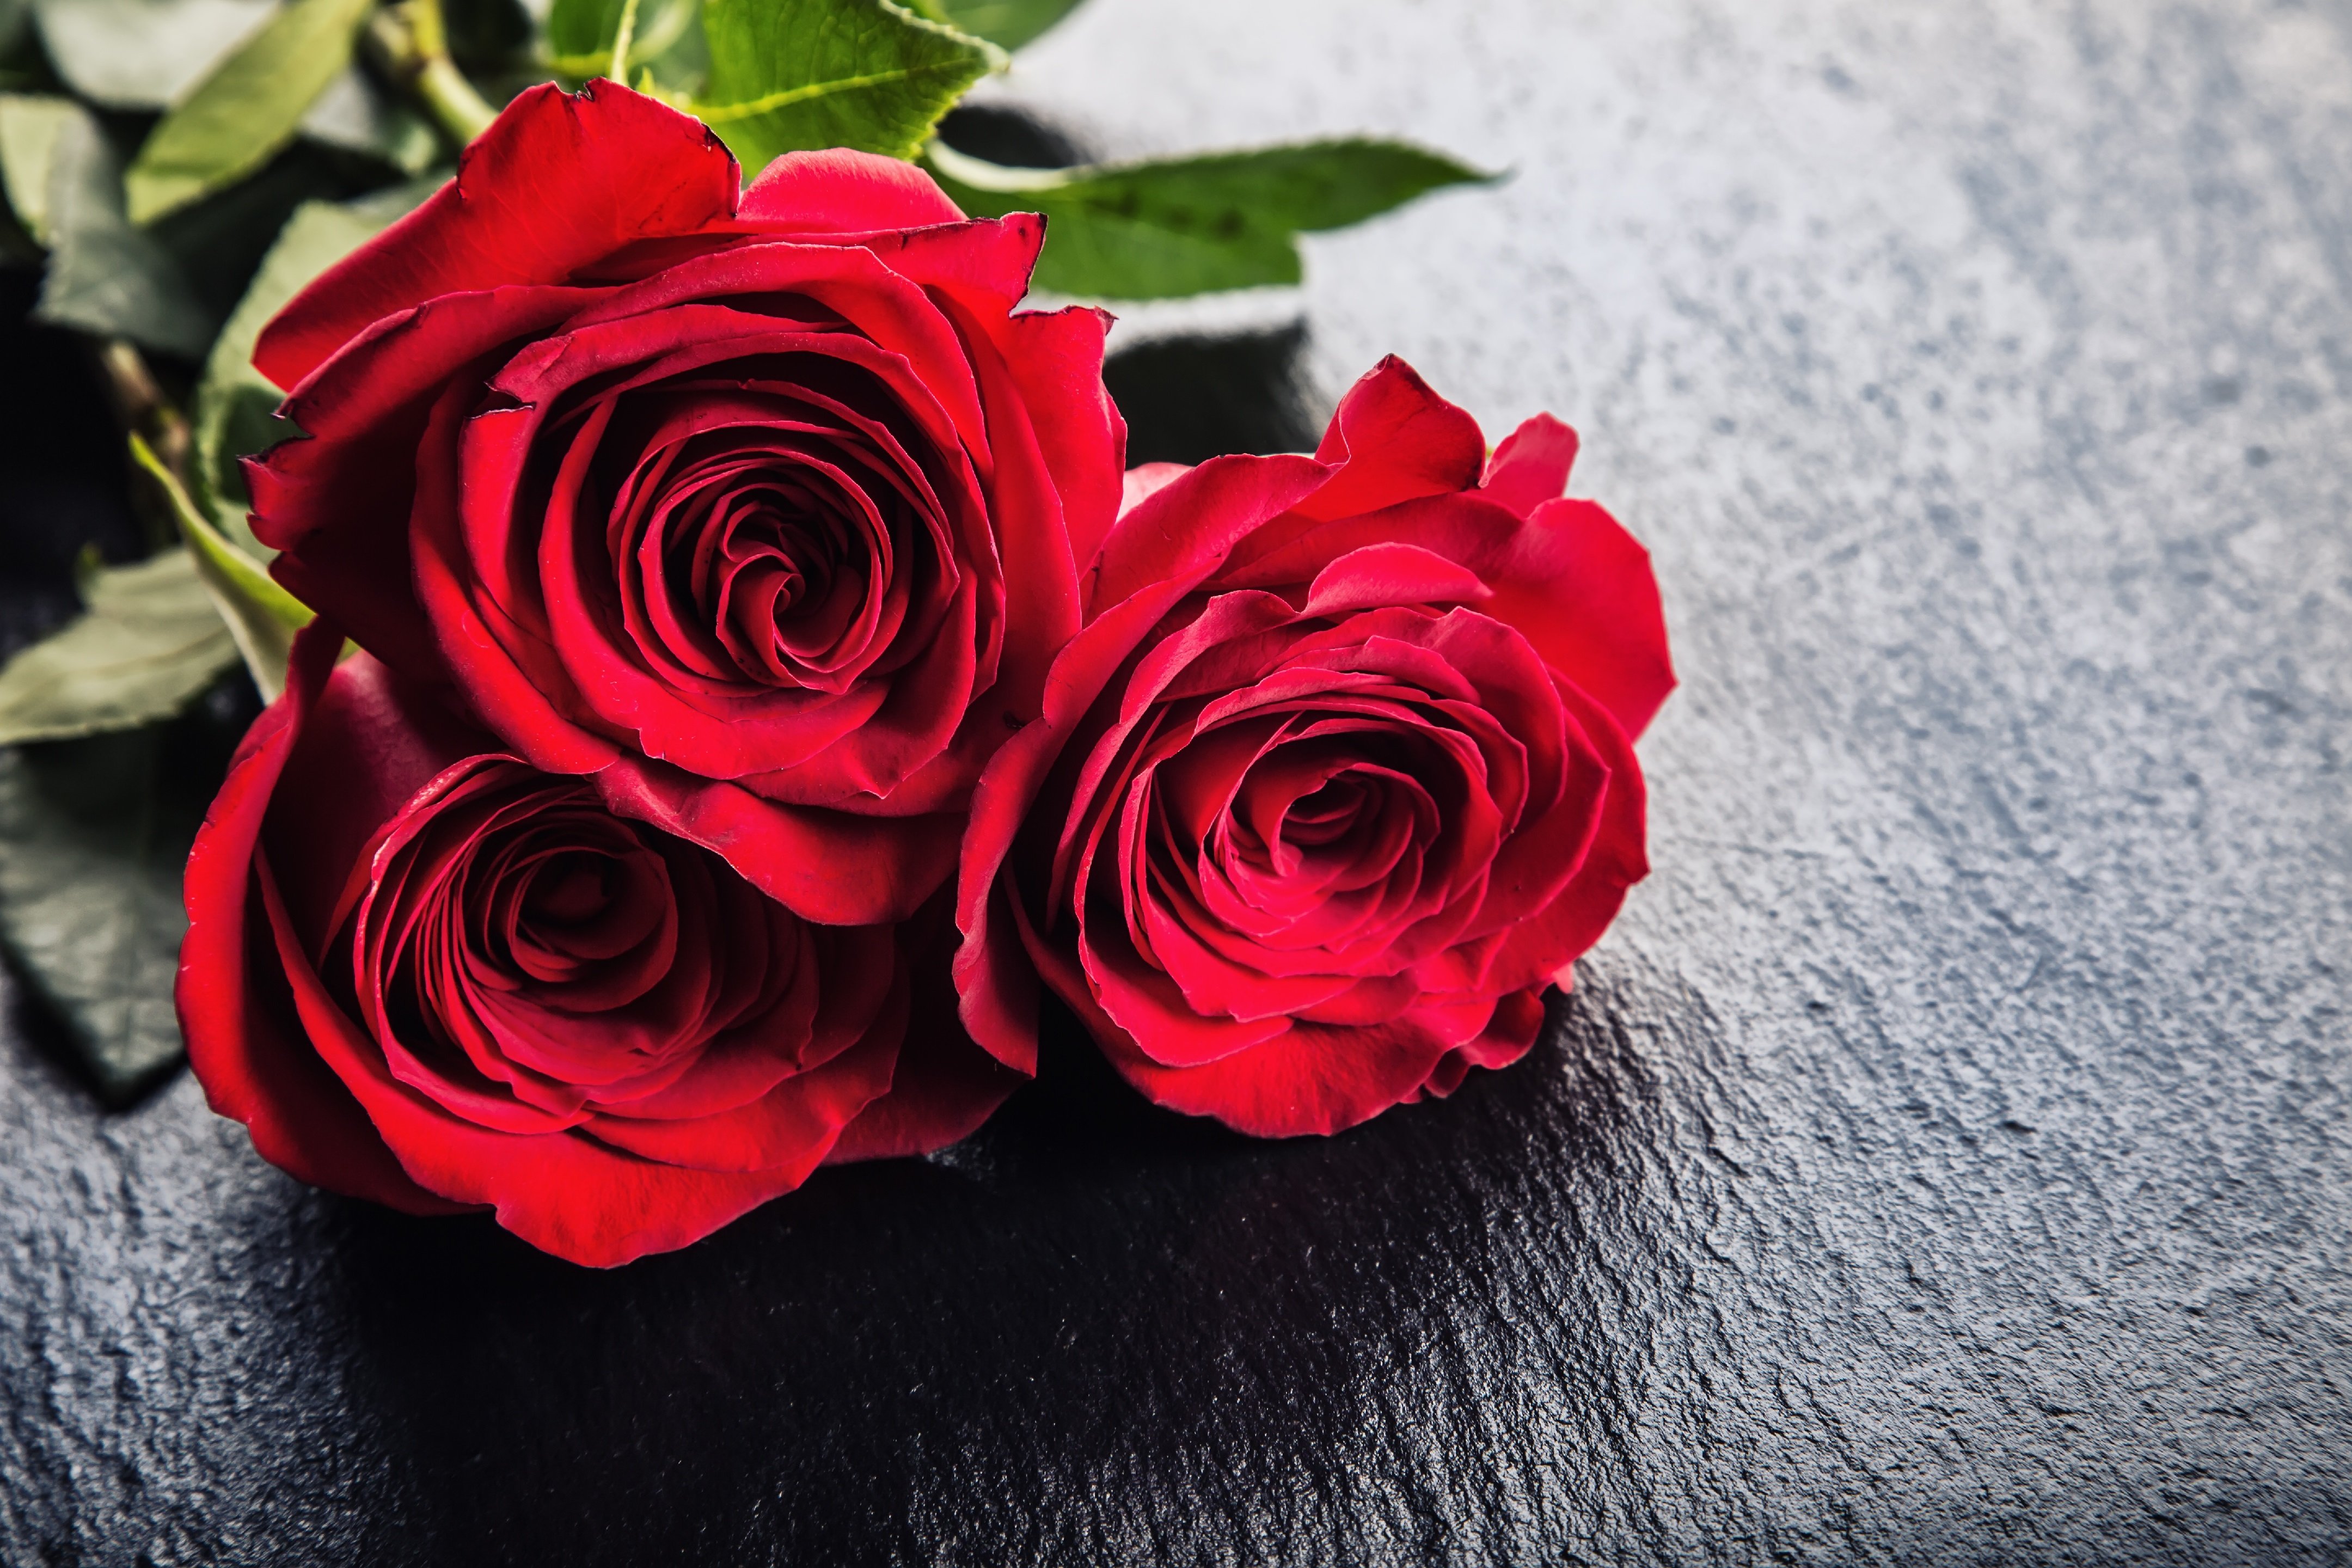 Rose Red Roses Bouquet Of Red Roses Several Roses On Granite Background Valentines Day